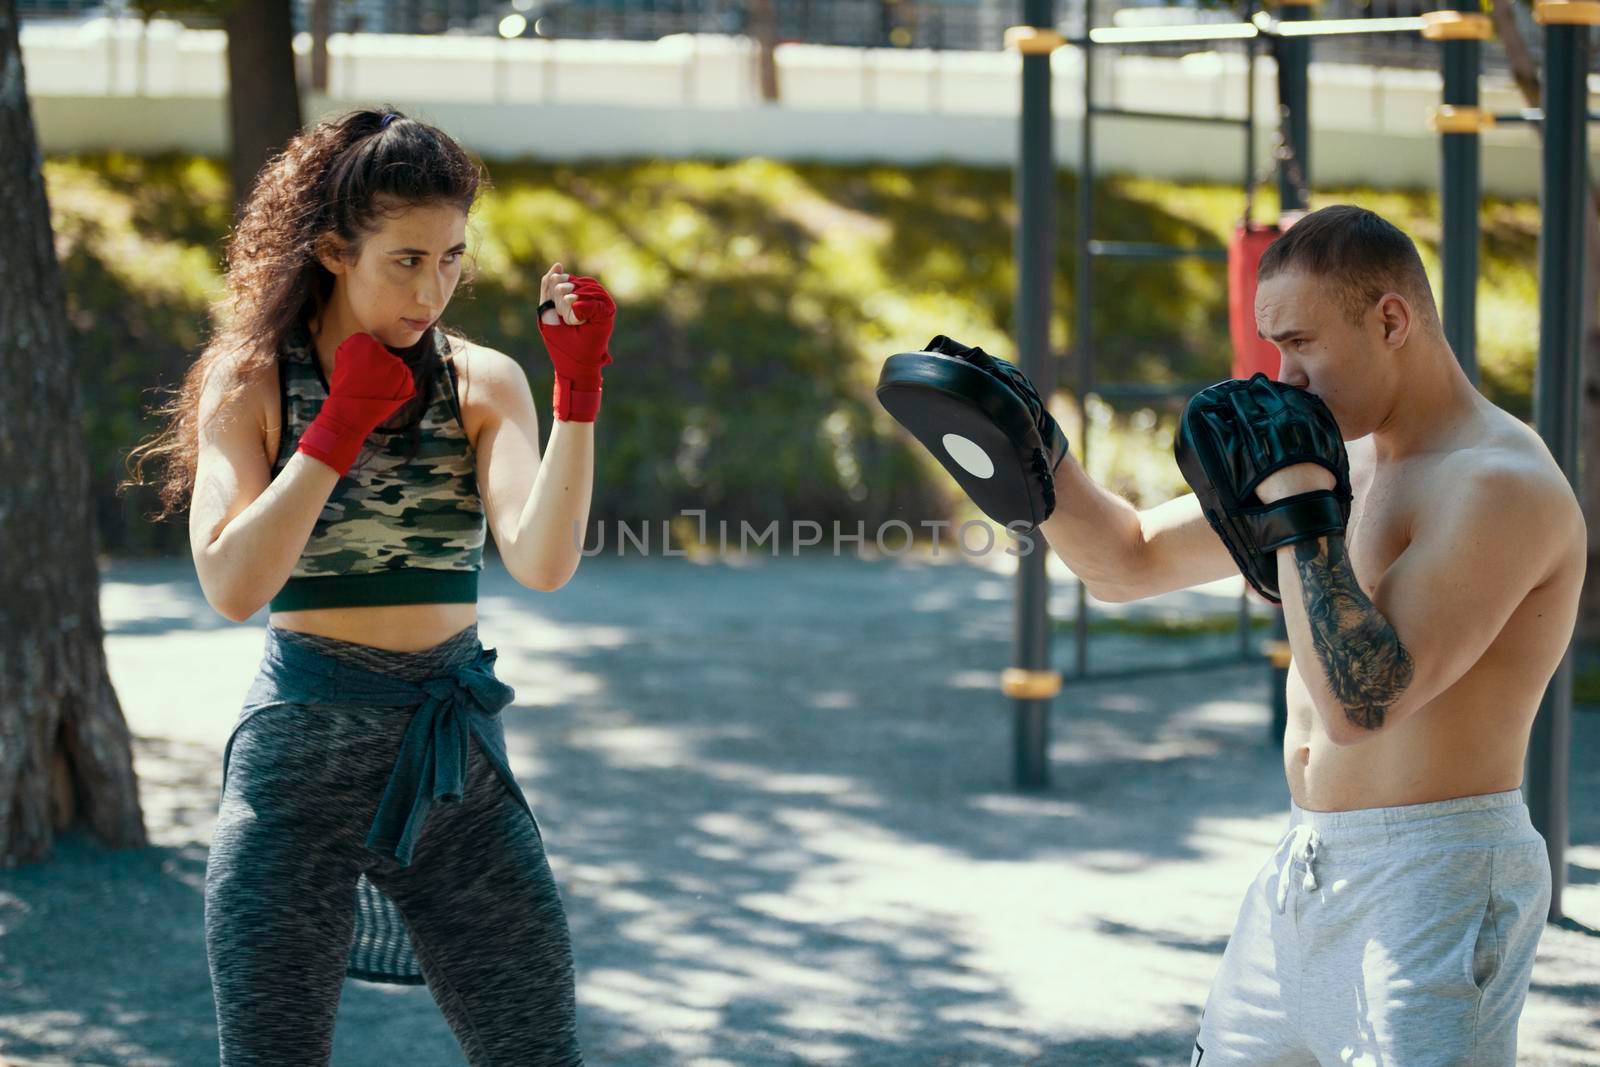 Boxers - muscular man and young woman engaged in boxing in the park ar sunny day, horizontal